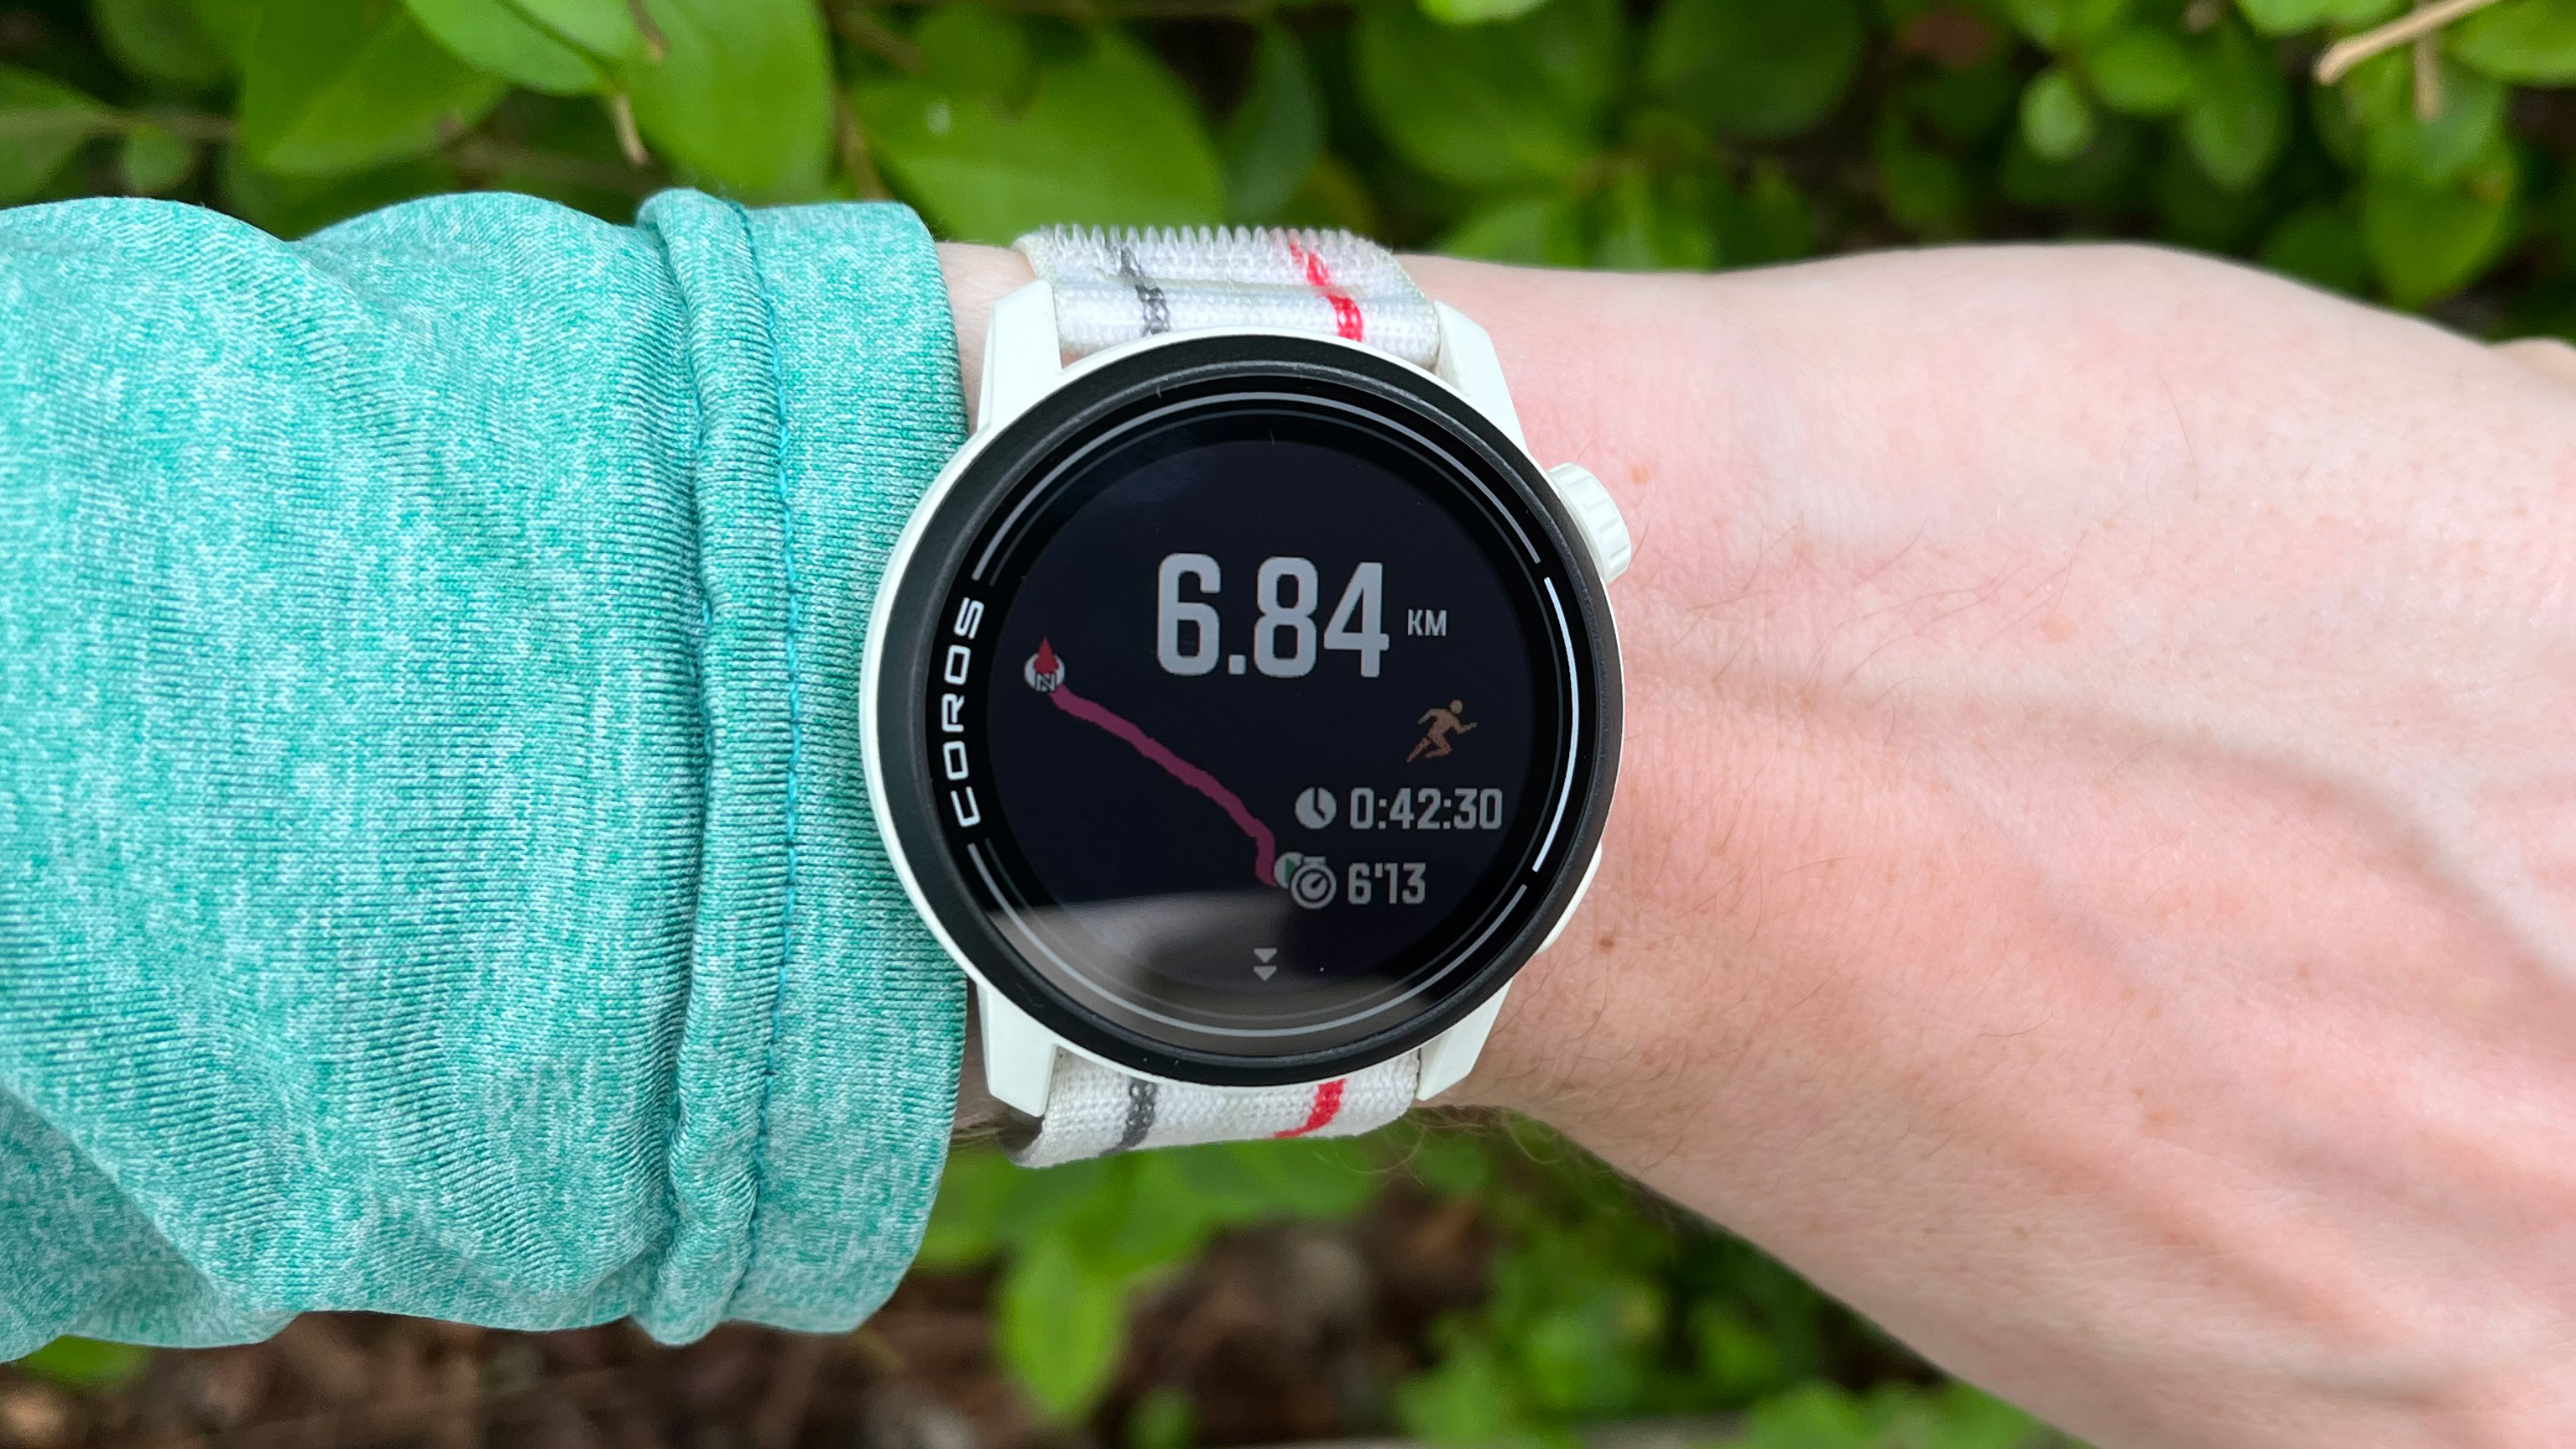 Coros Pace 2 Multi-Tester Review: Is this the best budget running